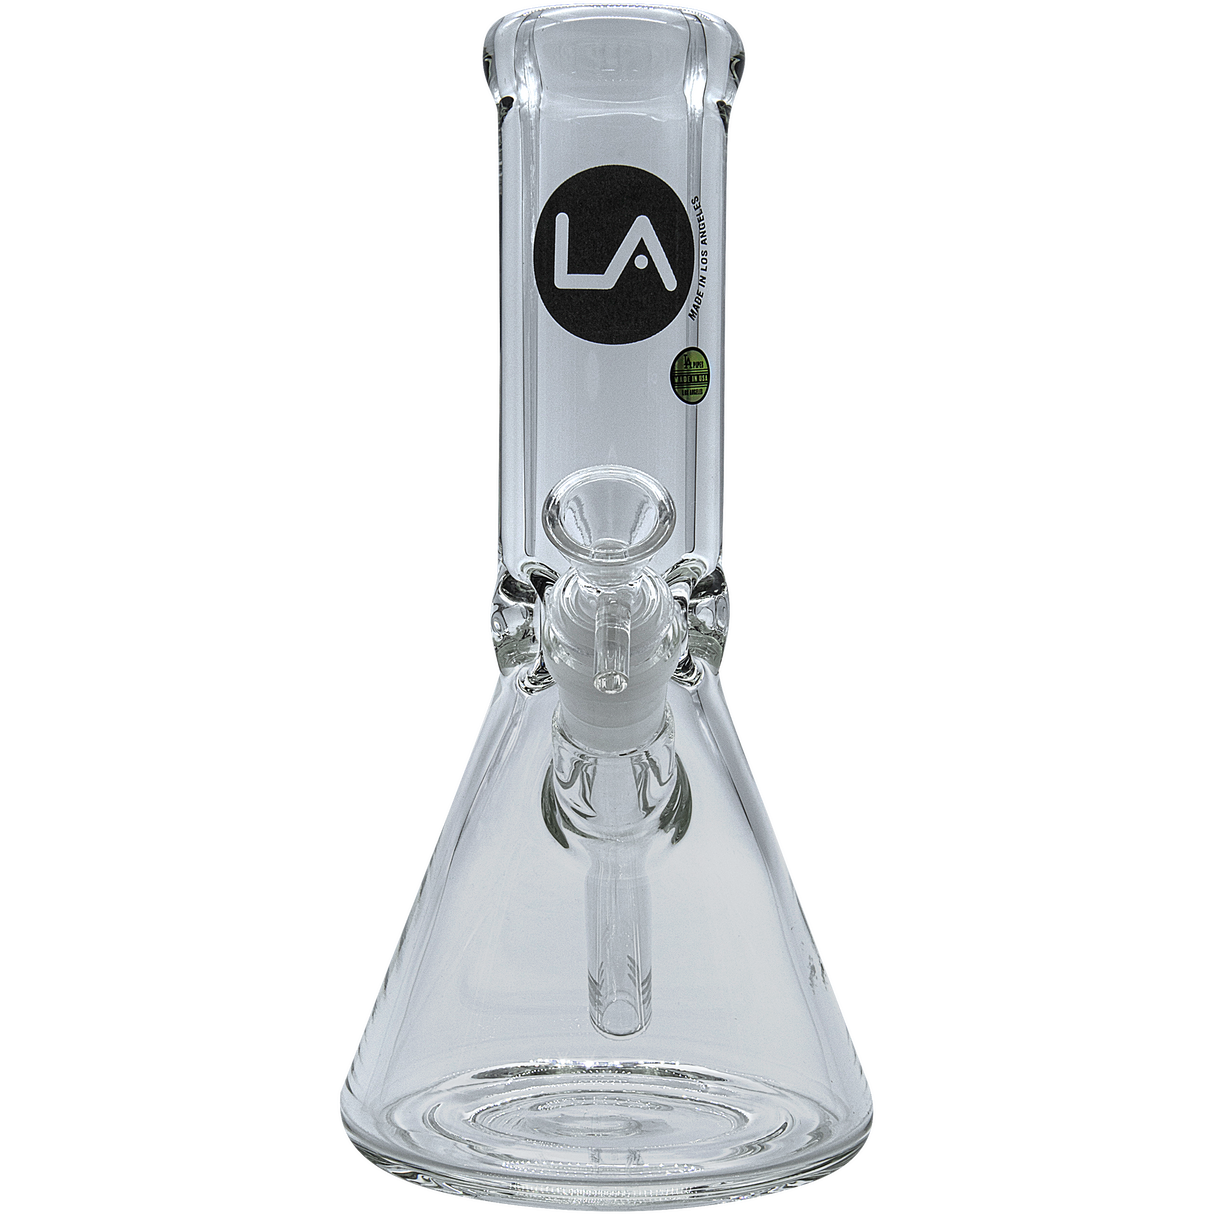 LA Pipes "Agent Stout" Beaker Bong, 9mm thick borosilicate glass, front view on white background